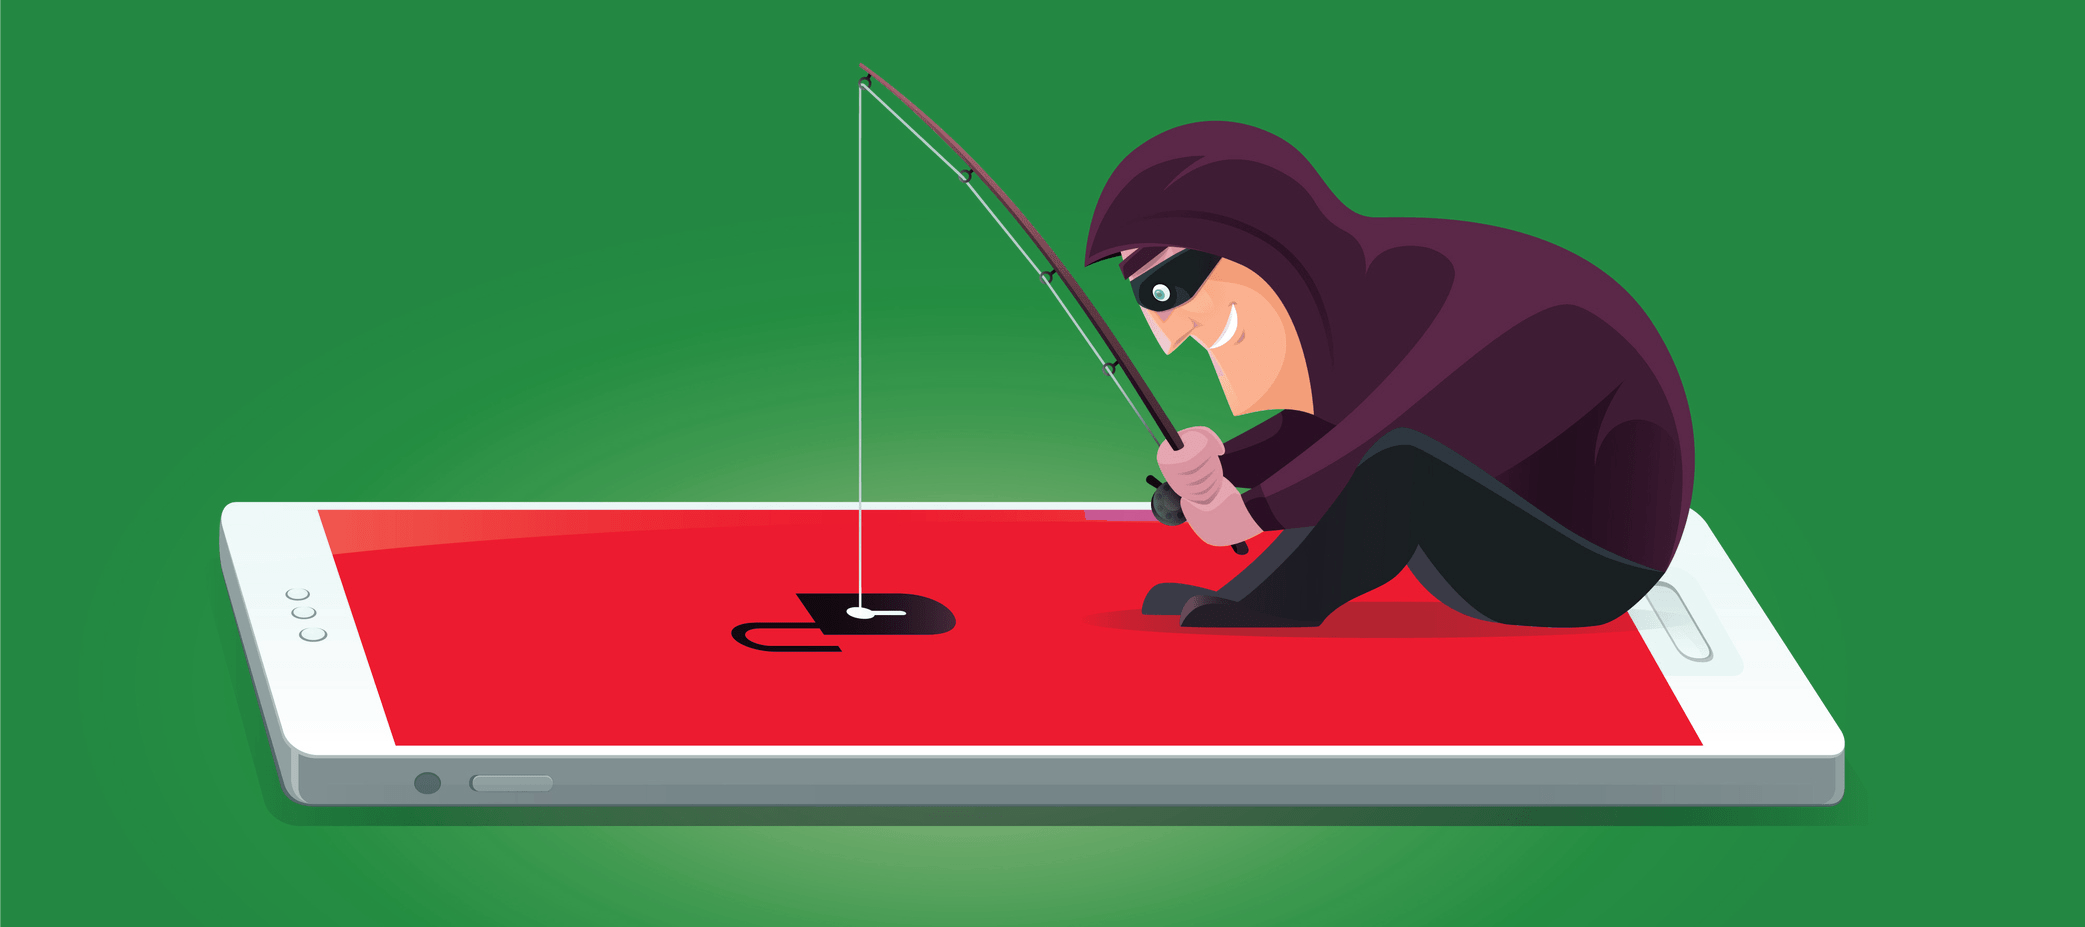 How to avoid phishing attack attempts by hackers